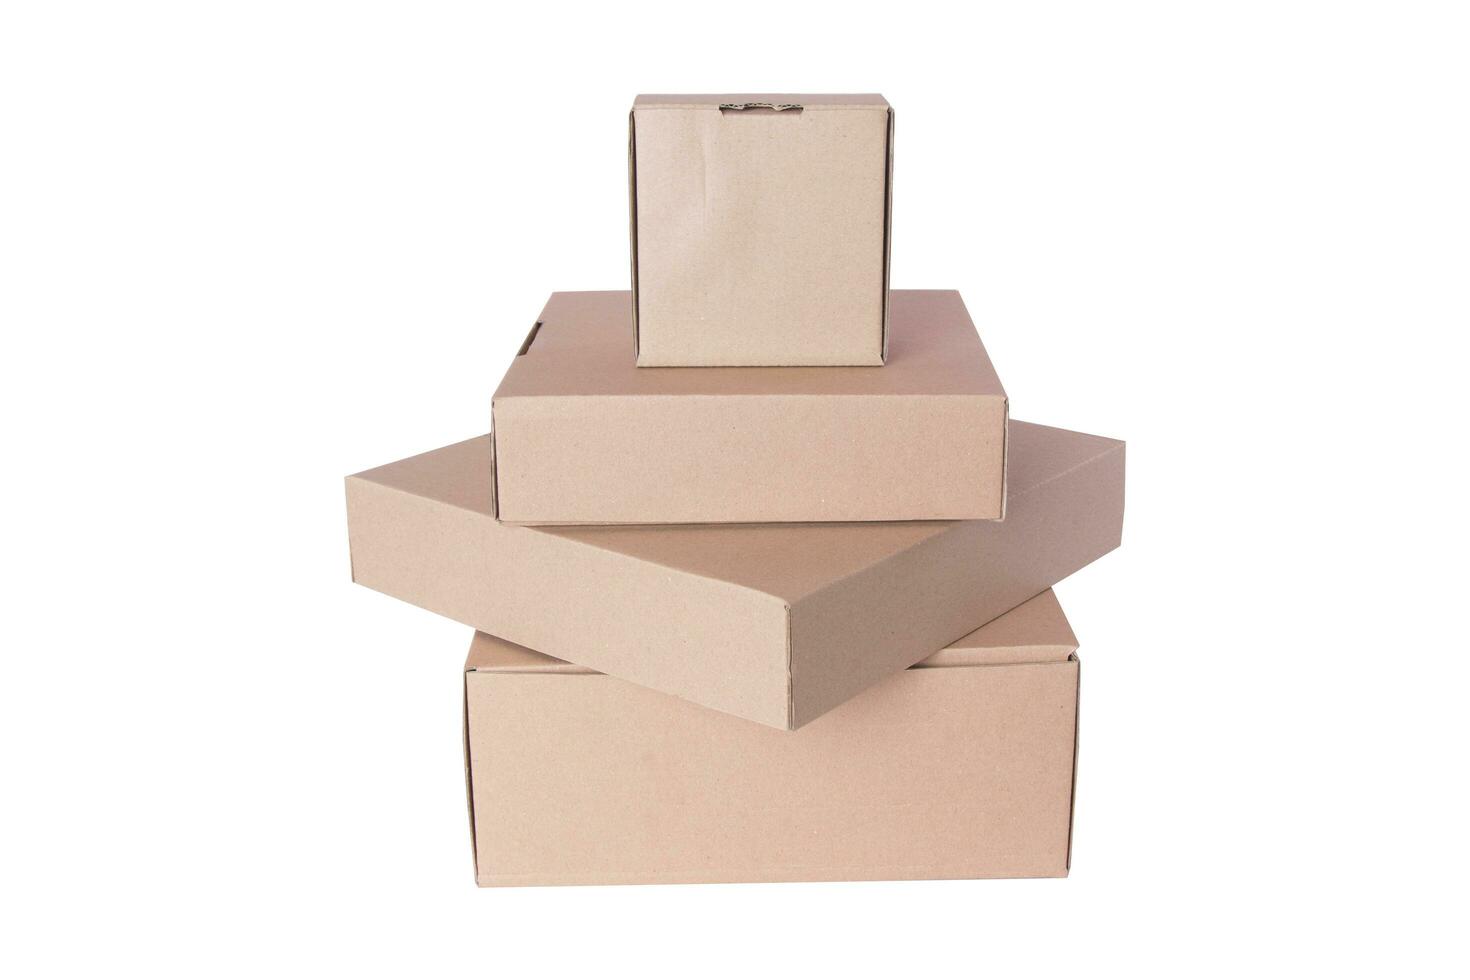 Brown cardboard shoe box with lid for gift packaging mockup isolated on white background with clipping path. photo